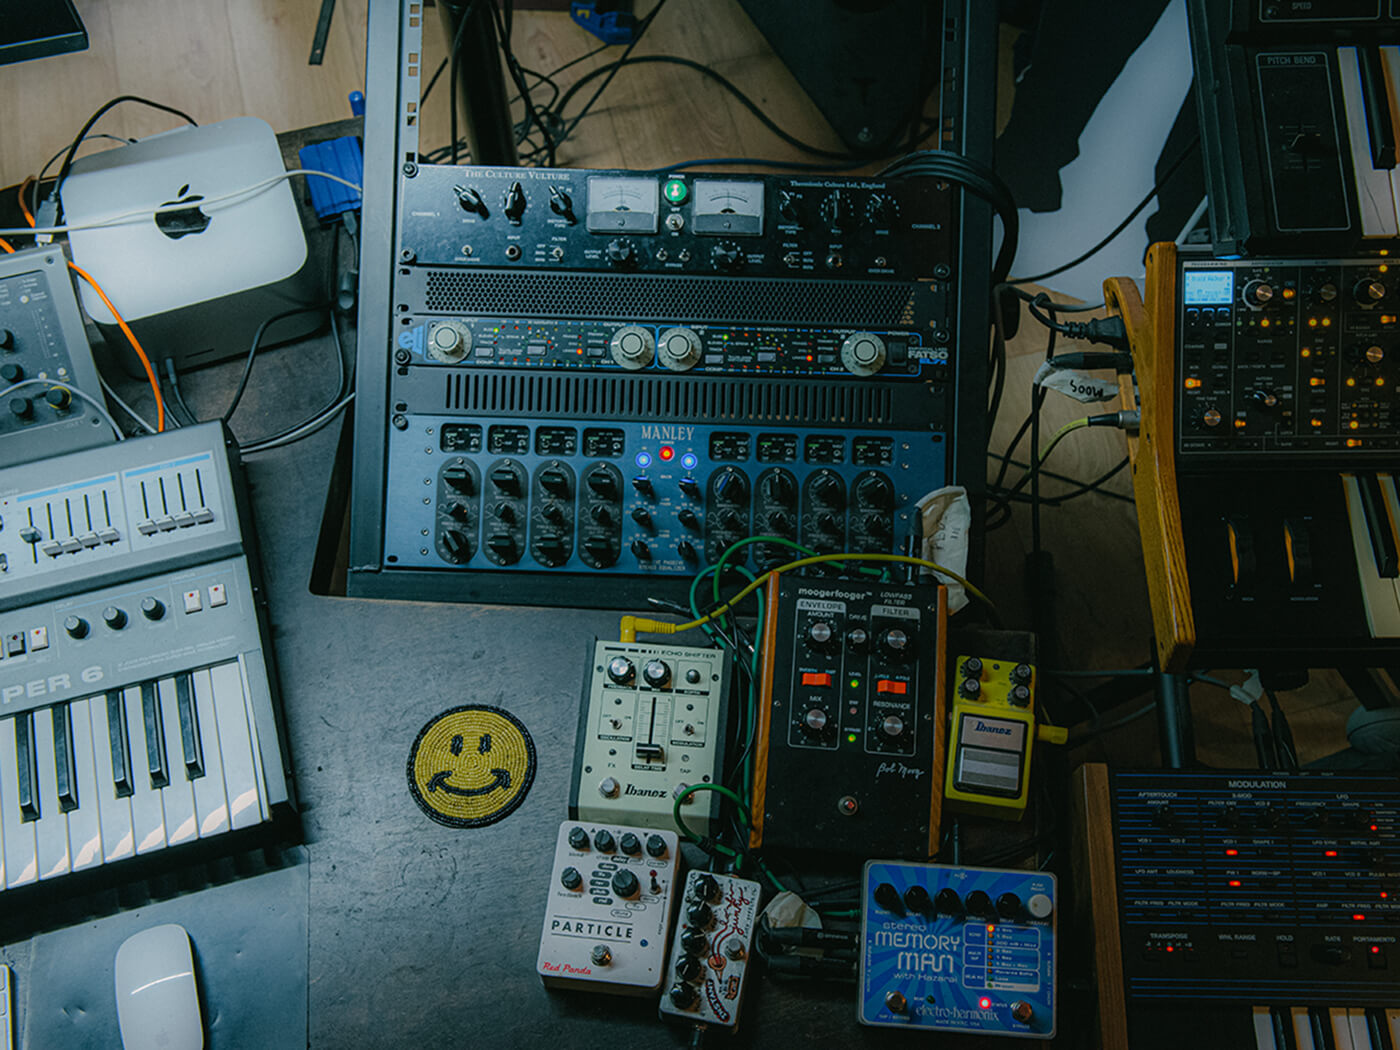 Gear in the studio shared by Voigtmann and Tom DeMac, photo by @Ginnypa